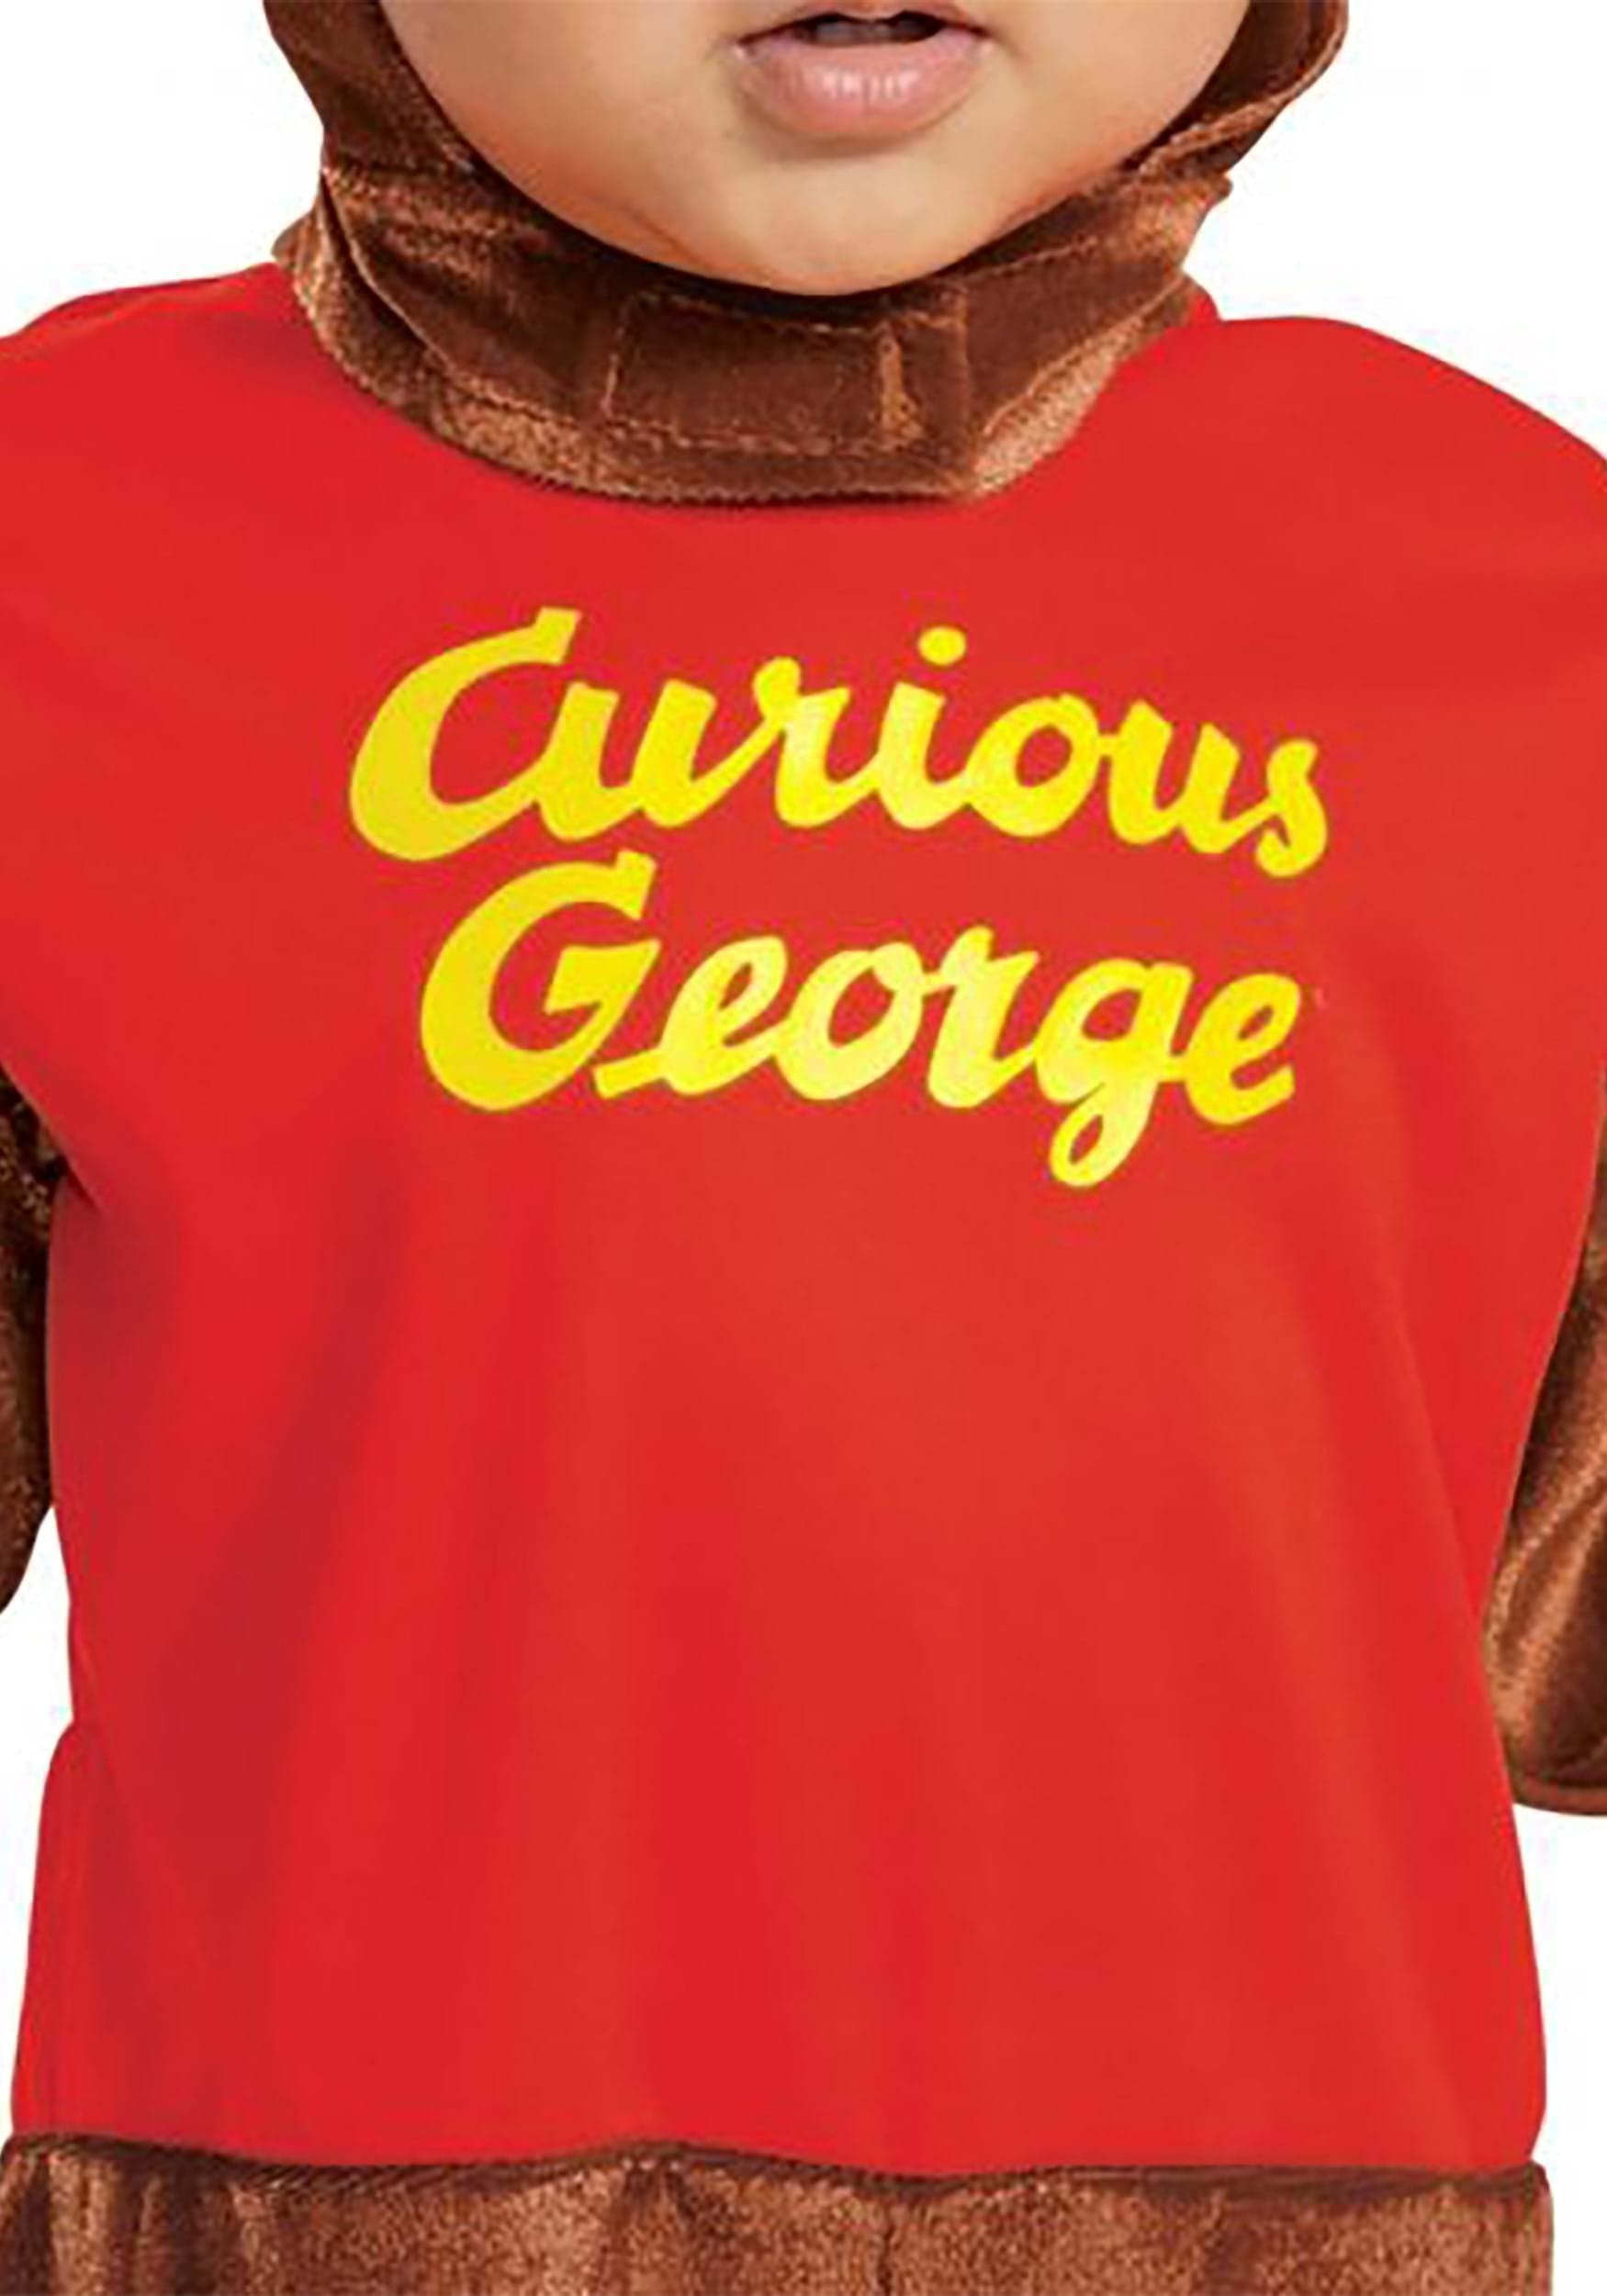 Disguise baby boys Curious George Costume, Official Curious George Onesie Infant and Toddler Costumes, As Shown, Size 6-12 months US